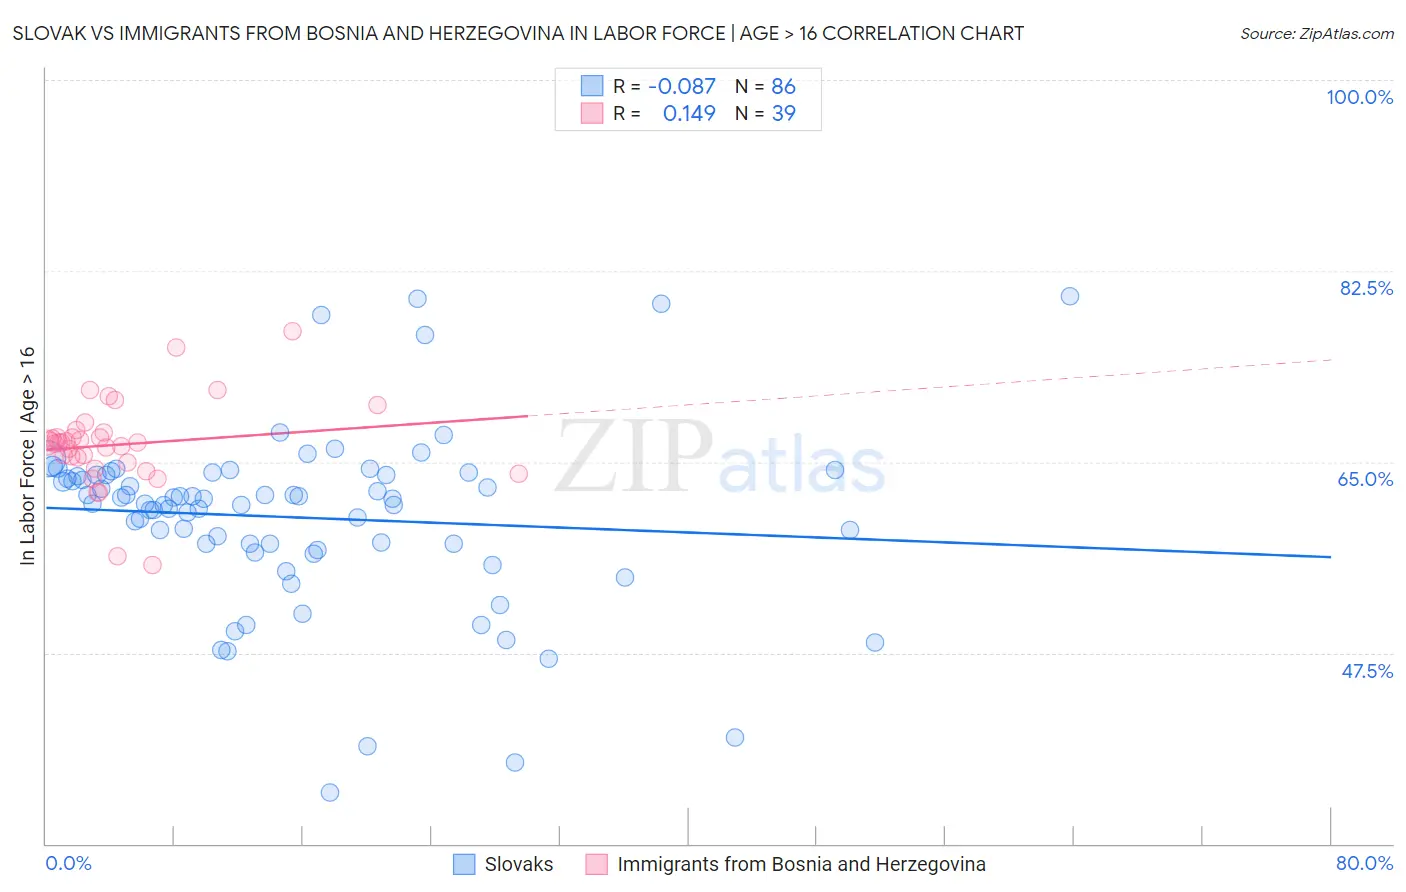 Slovak vs Immigrants from Bosnia and Herzegovina In Labor Force | Age > 16